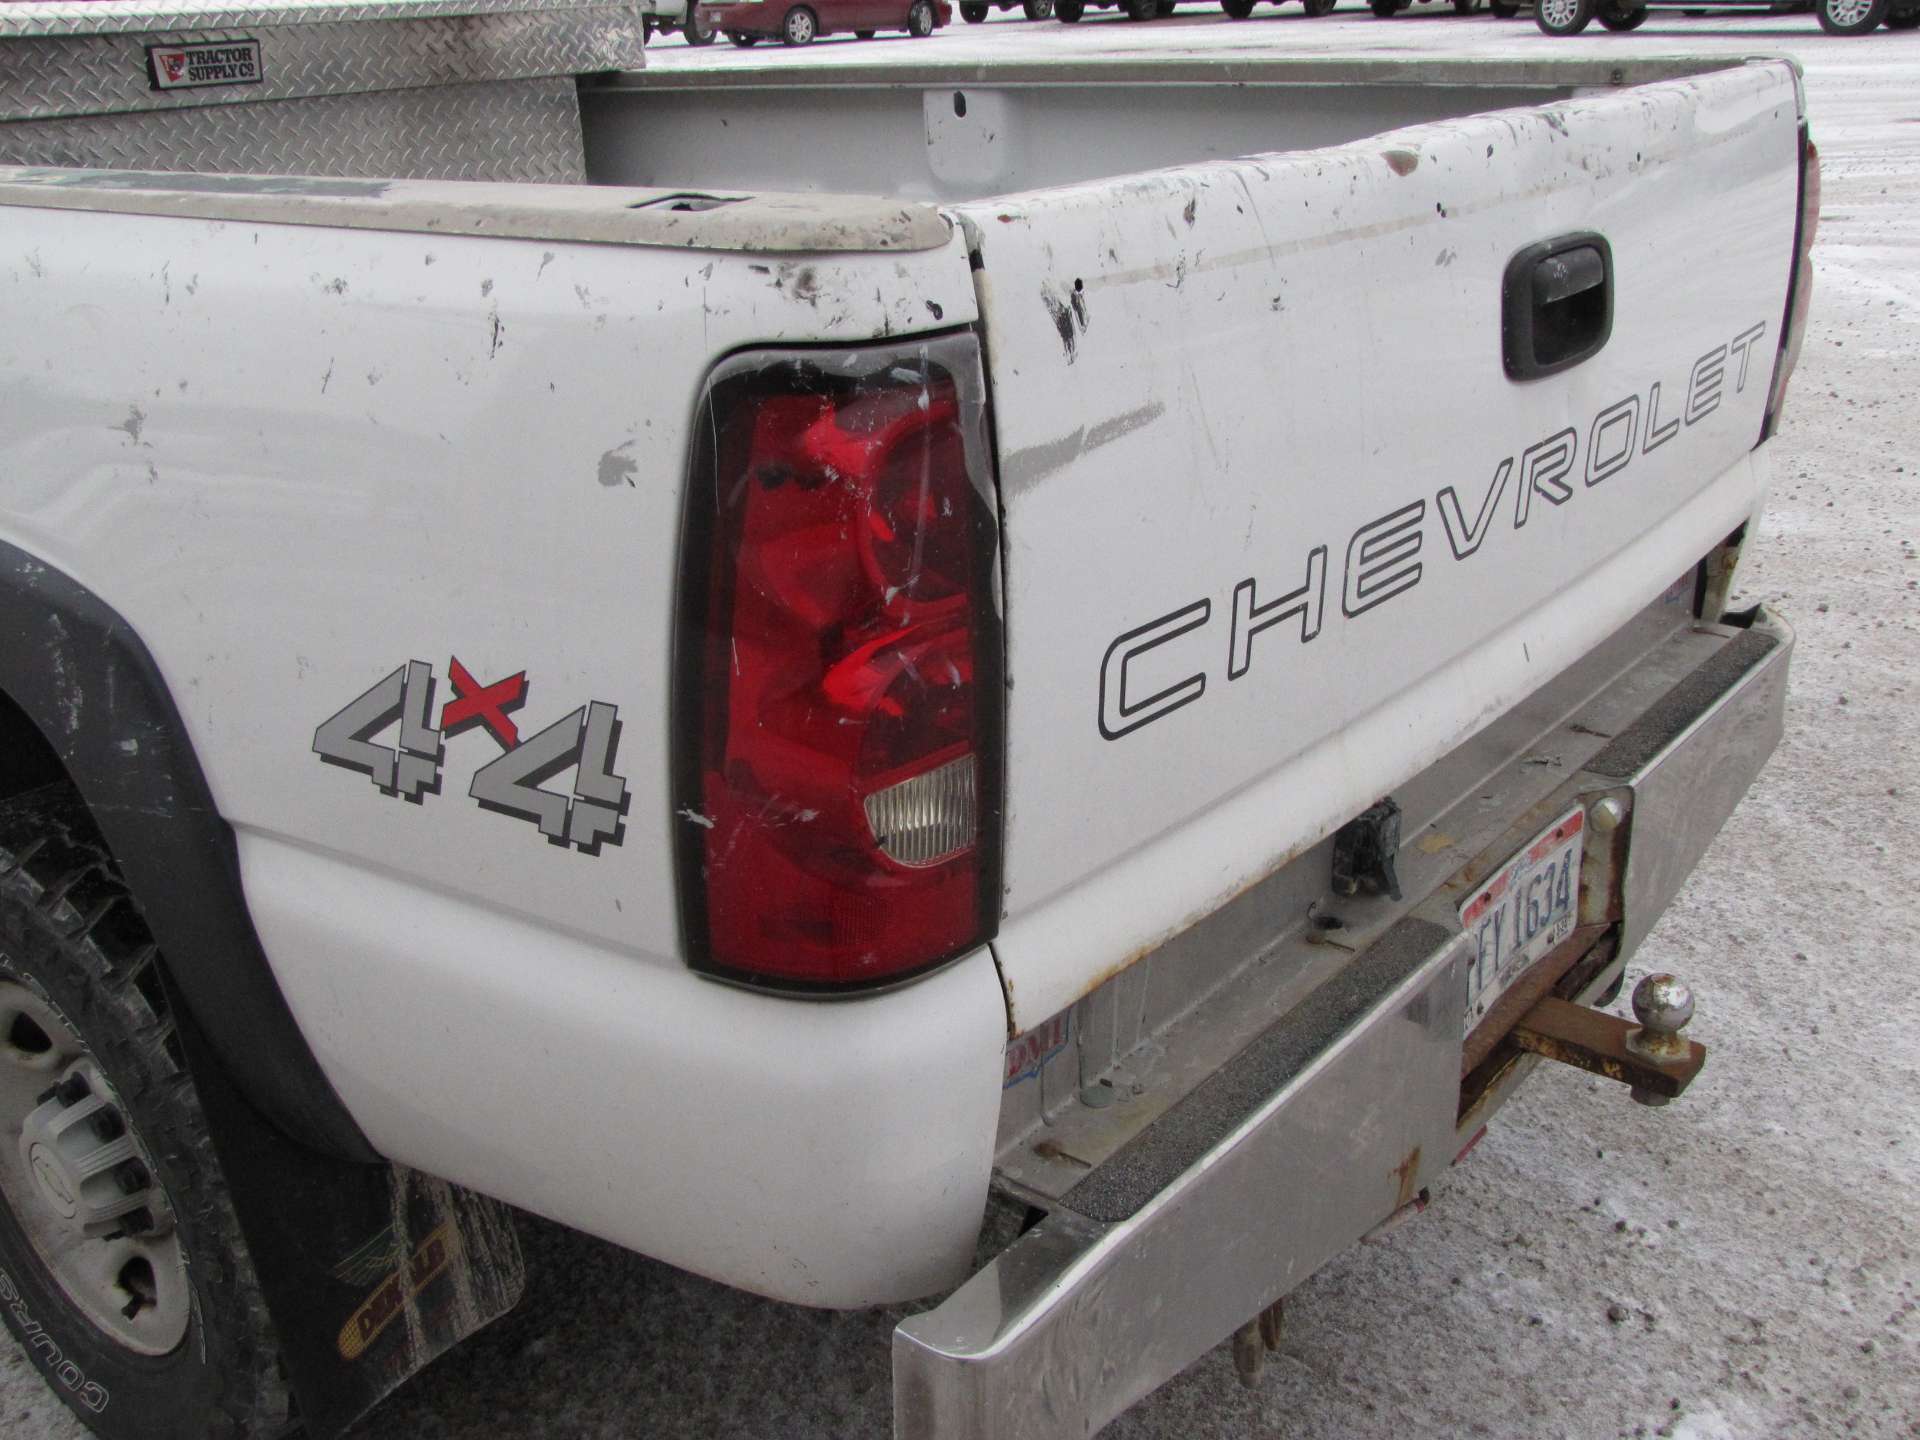 2006 Chevy 2500 HD pickup truck - Image 32 of 63